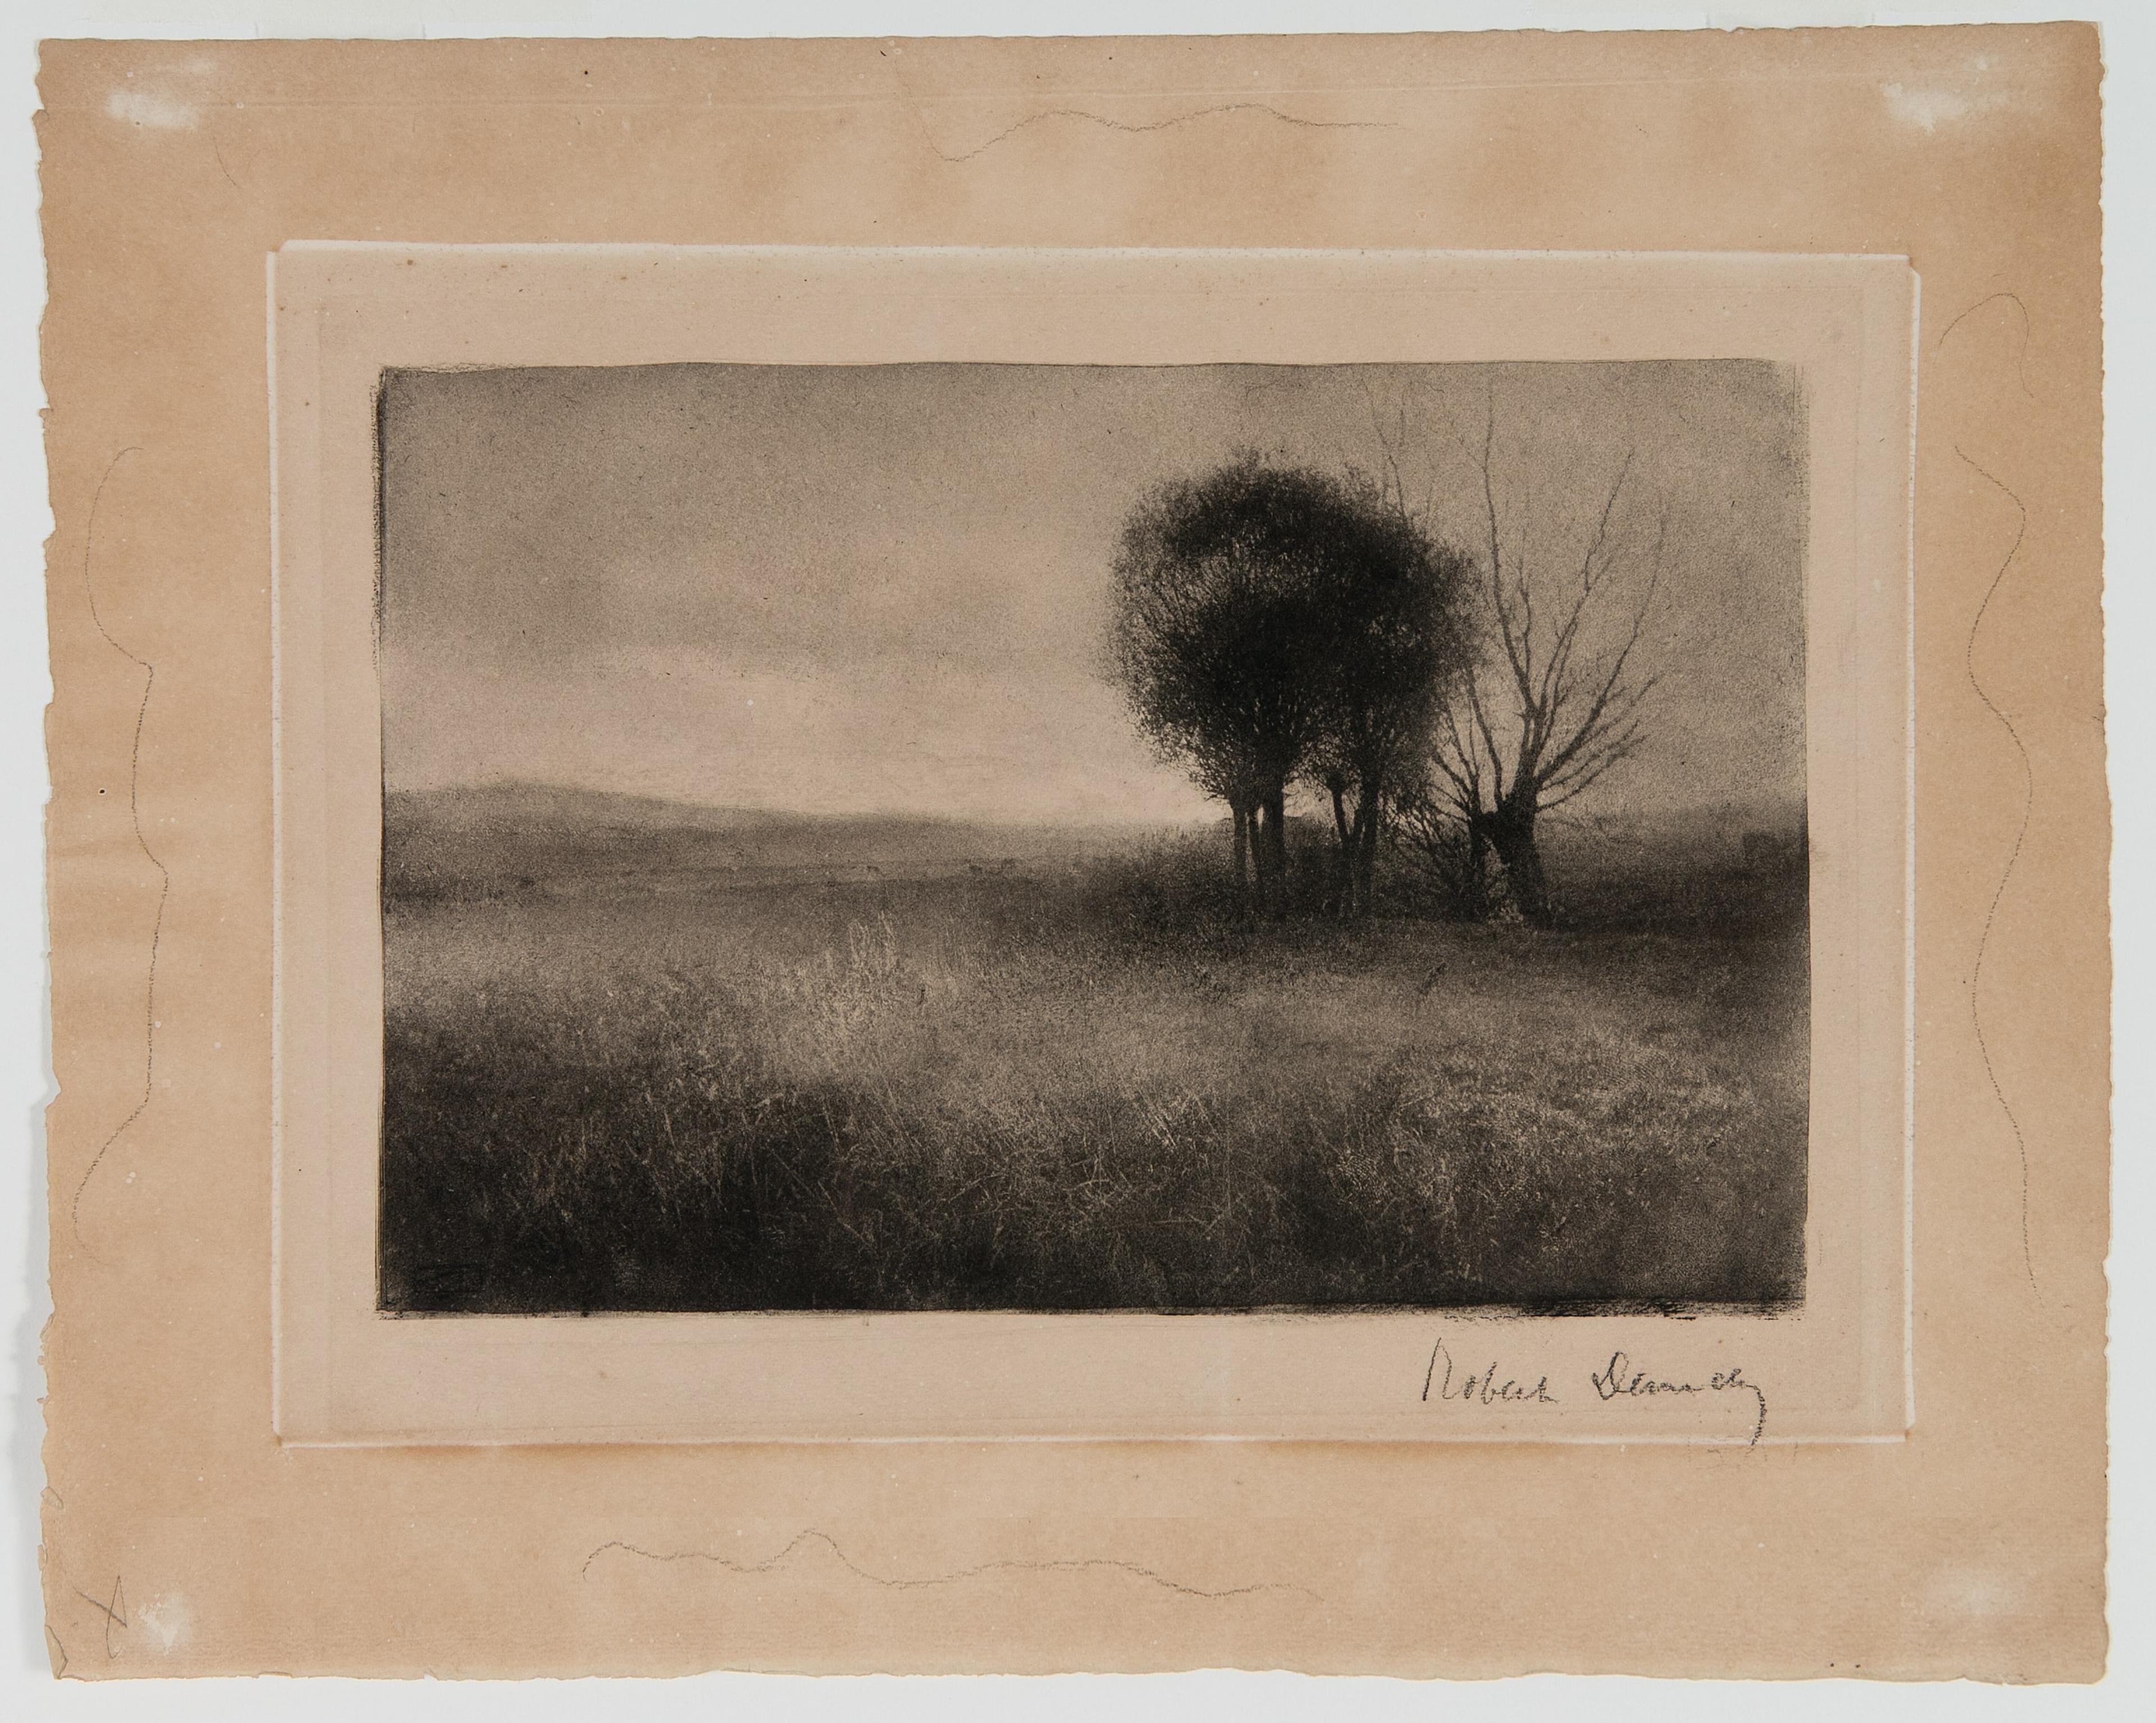 Robert Demachy, Landscape c,1890-1914, gum bichromate photograph. Collection of Sarjeant Gallery Te Whare o Rehua